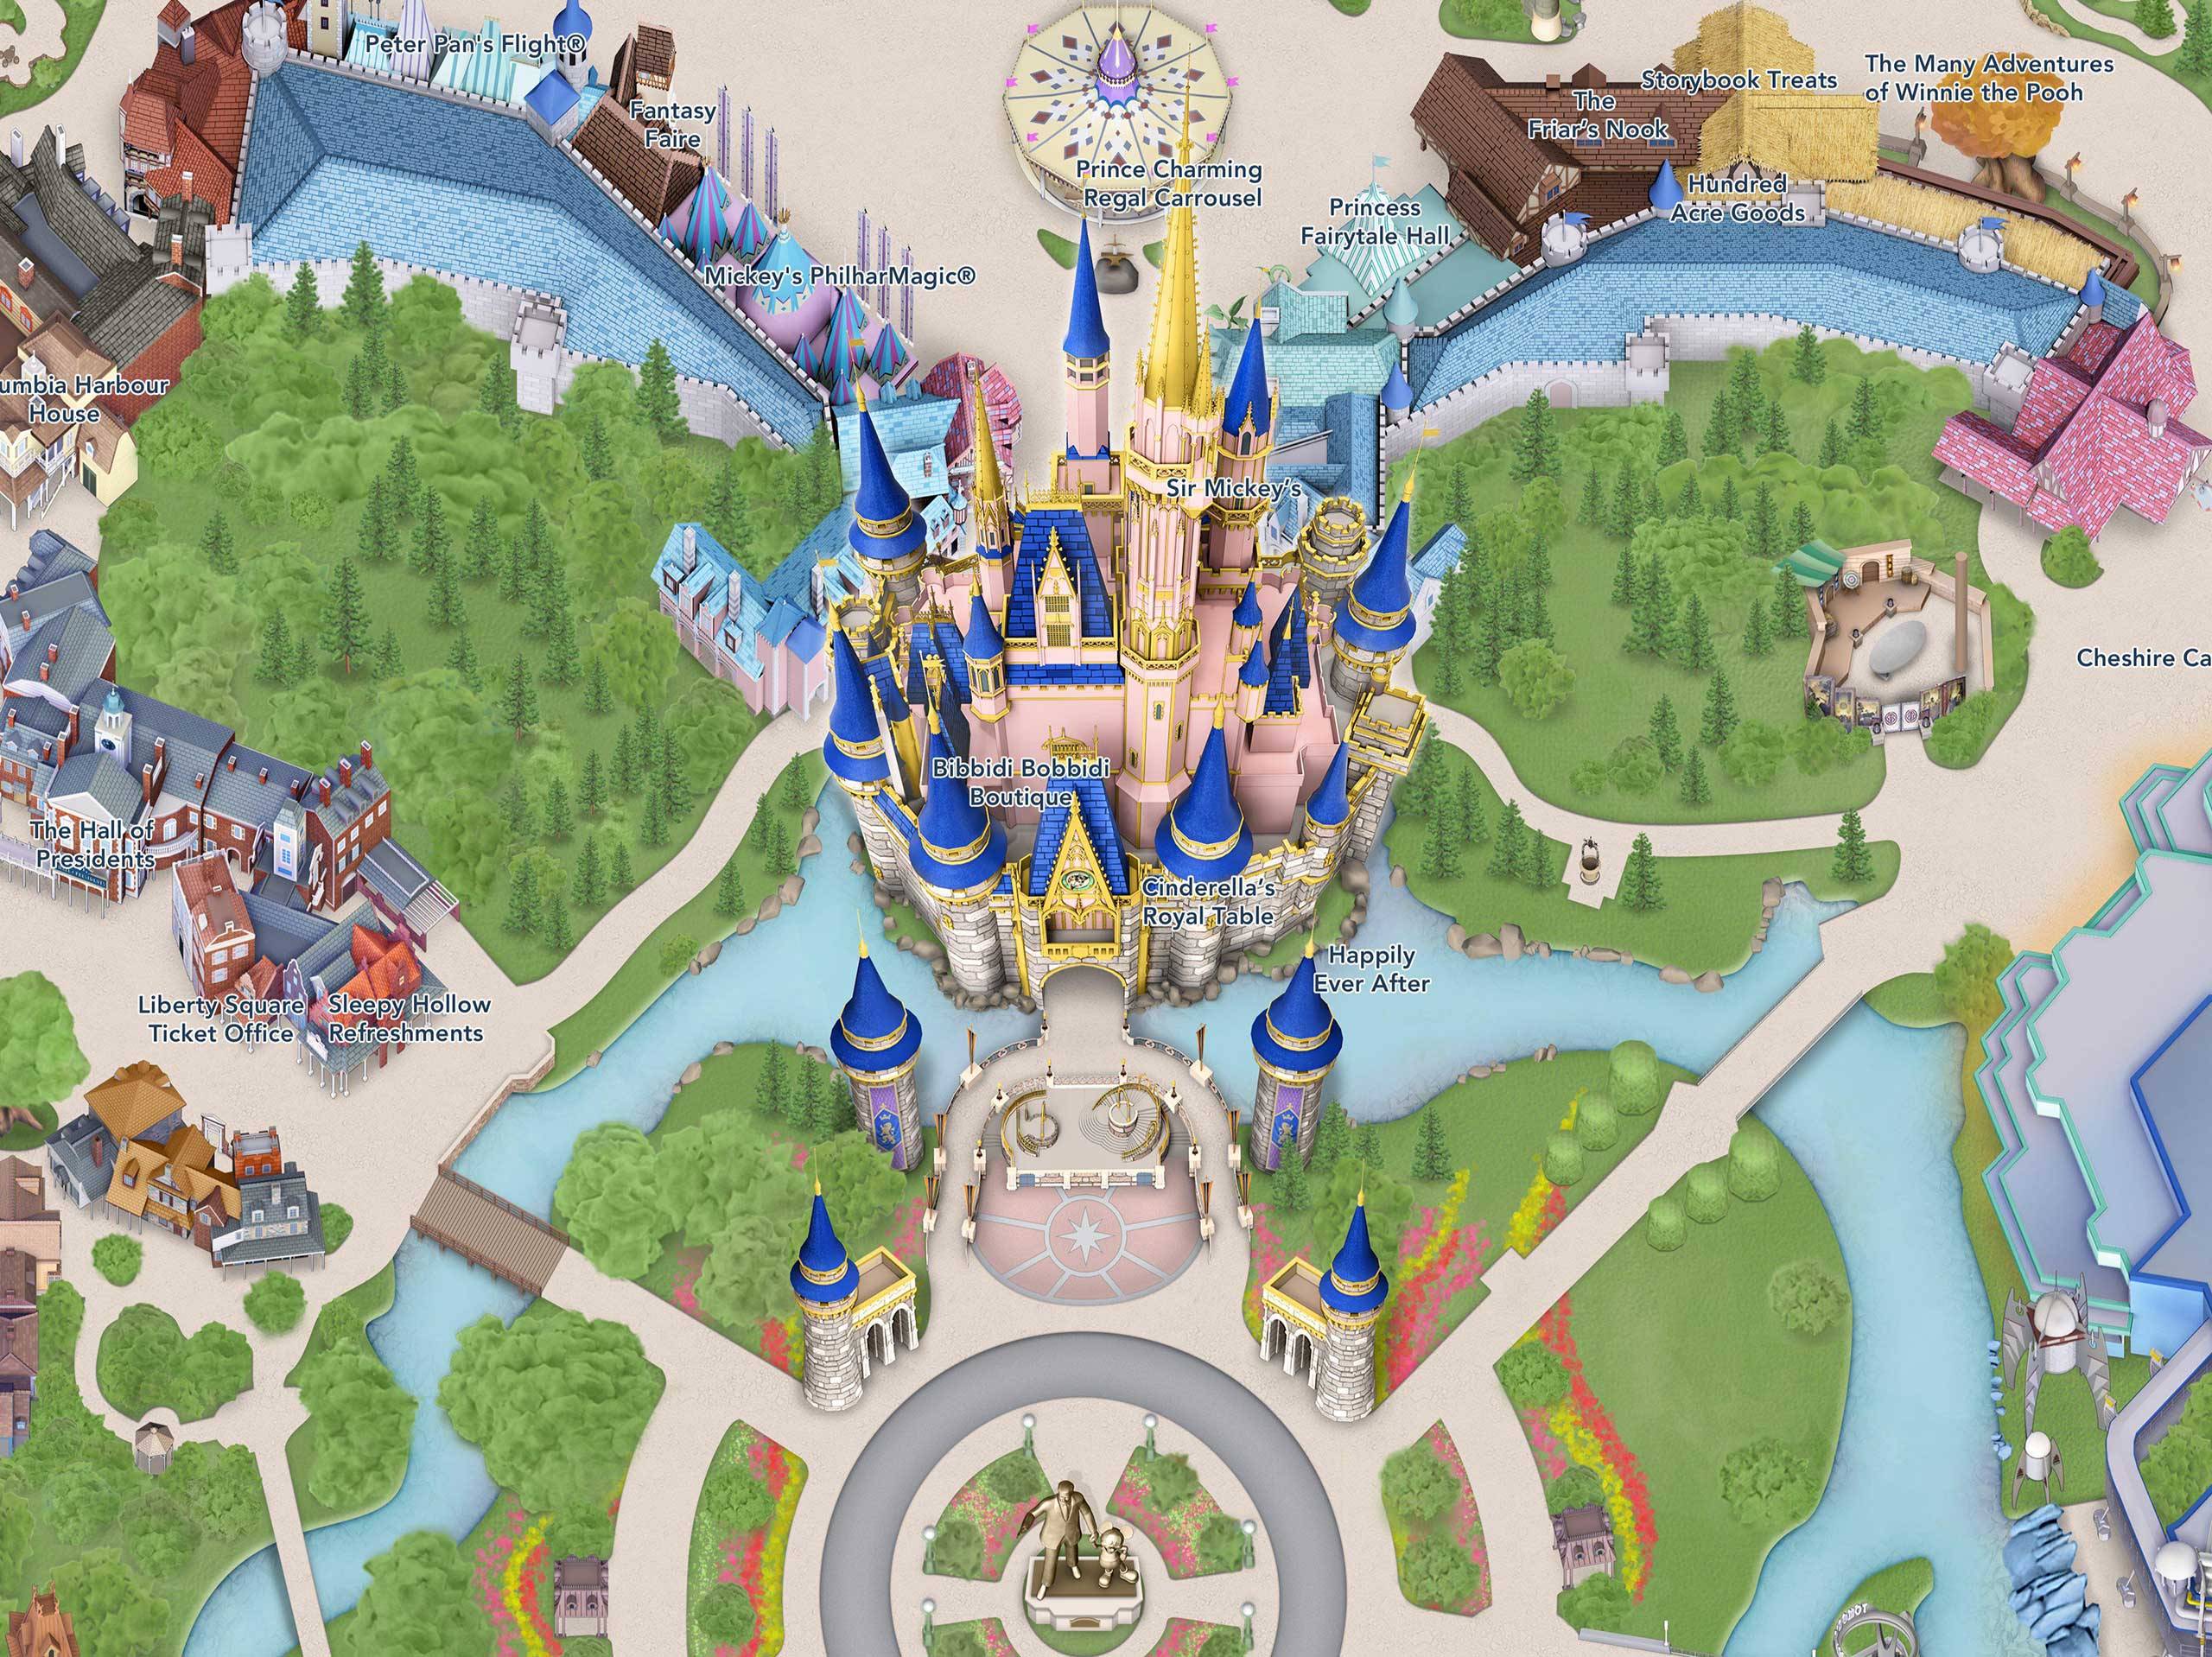 PHOTOS - My Disney Experience digital map update for Magic Kingdom includes new-look castle and Grand Floridian walkway